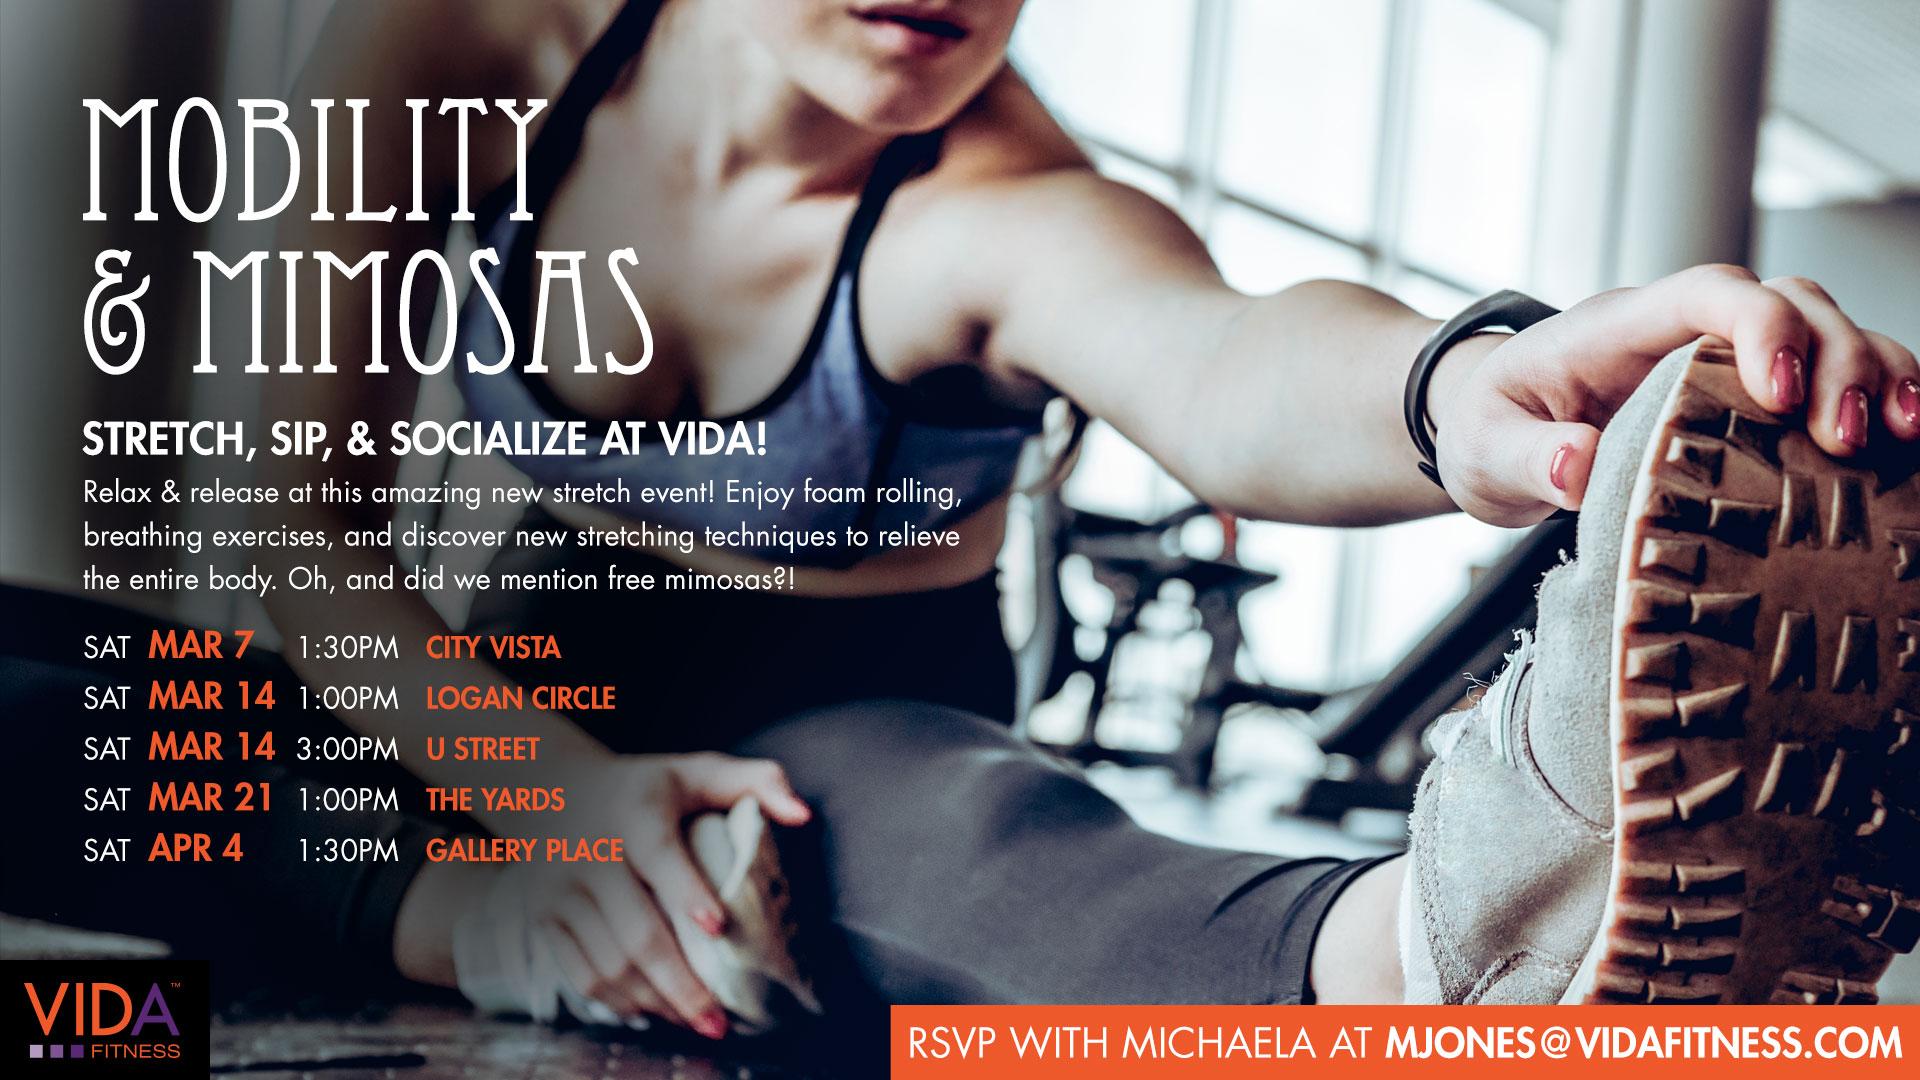 Mobility & Mimosas @ VIDA Gallery Place